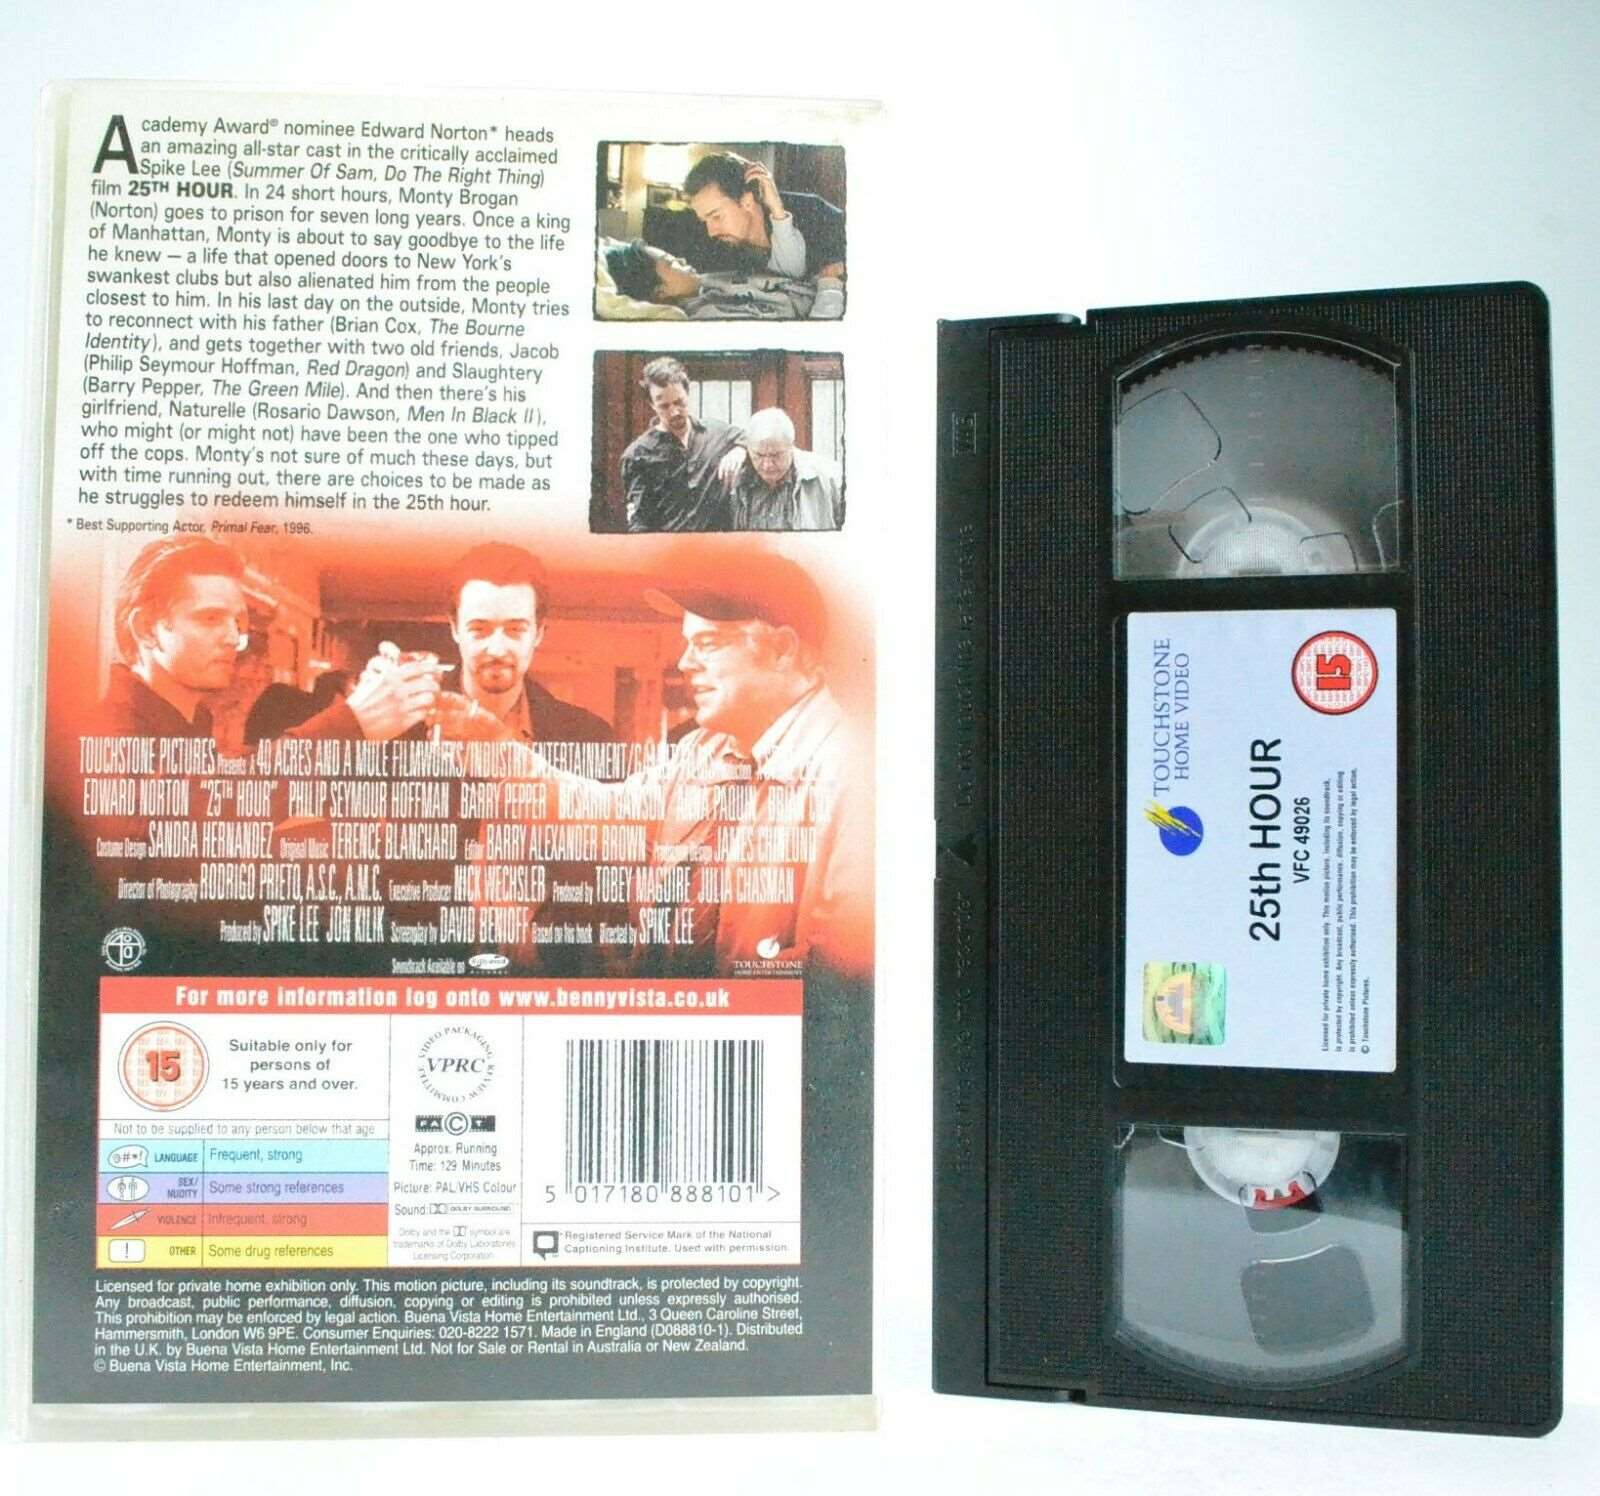 25th Hour: A S.Lee Joint - Thriller - Large Box - Ex-Rental - E.Norton - Pal VHS-